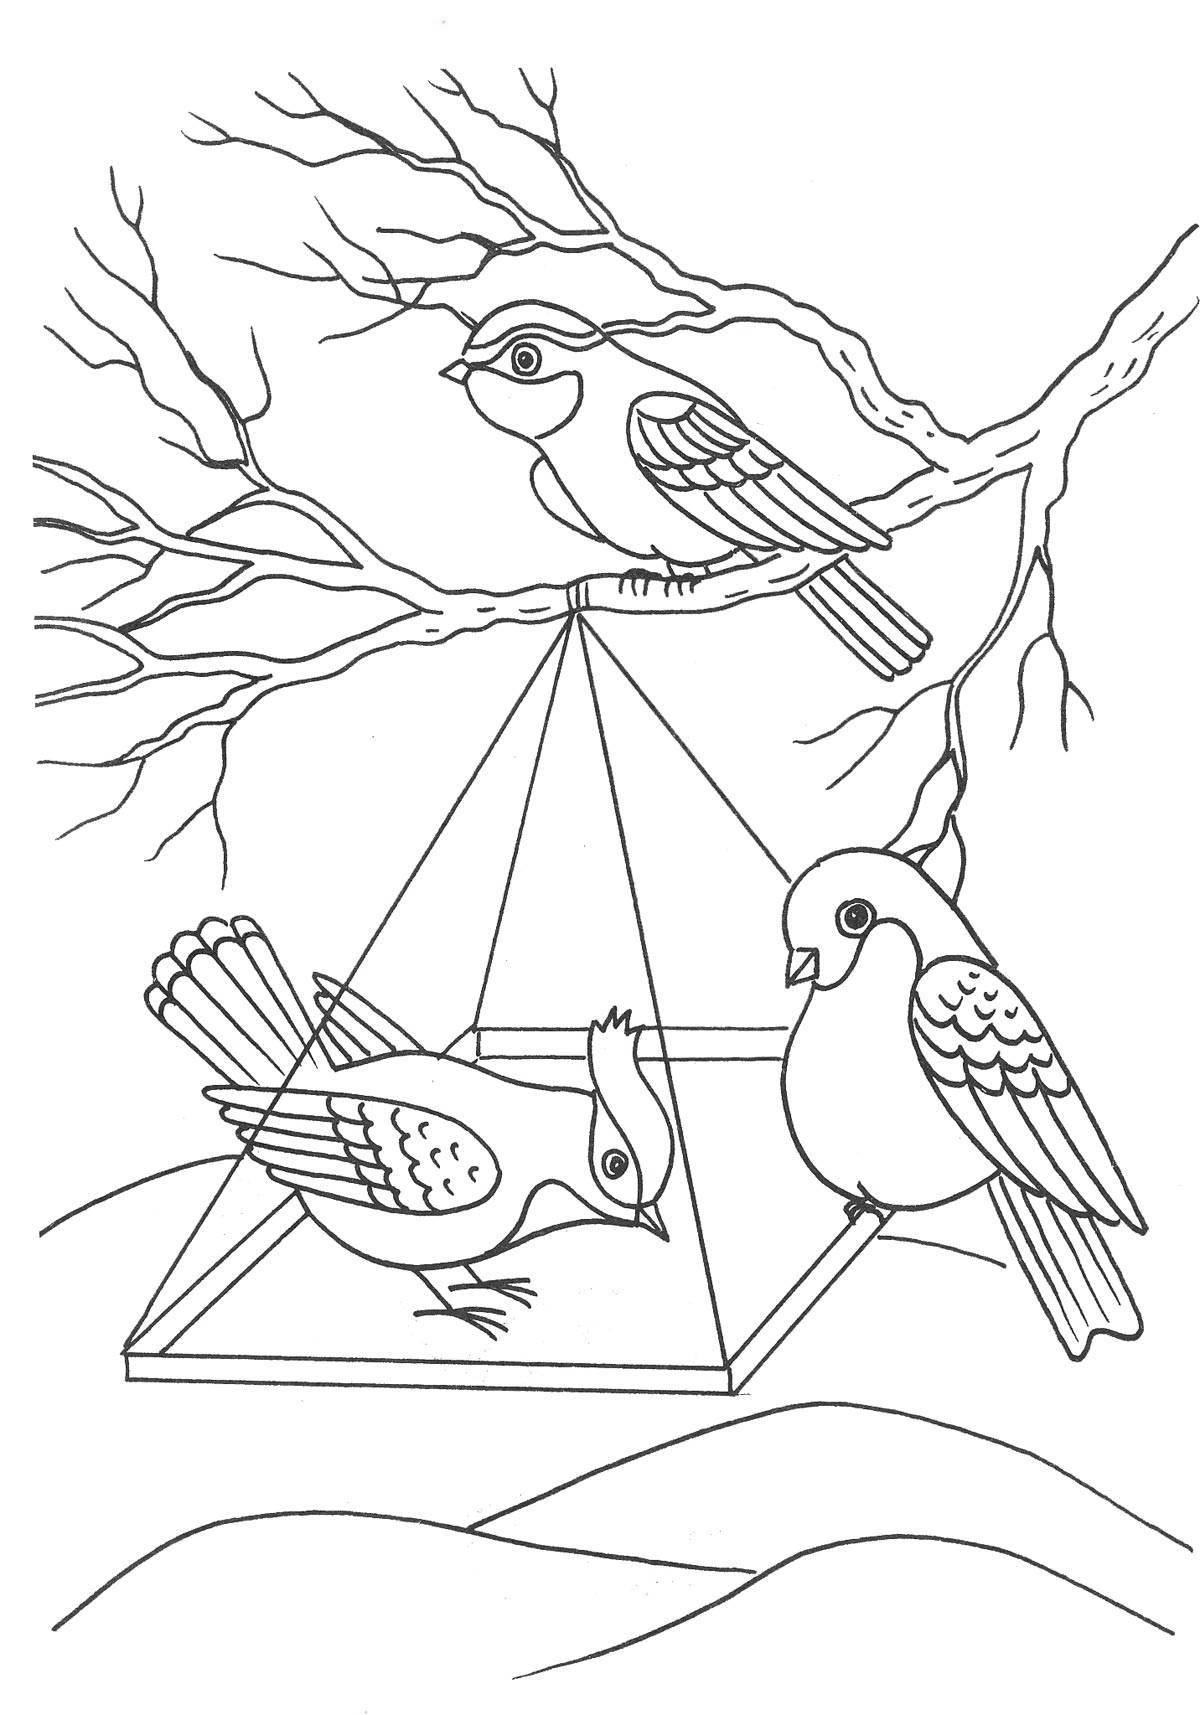 Stimulating feeder coloring page for kids